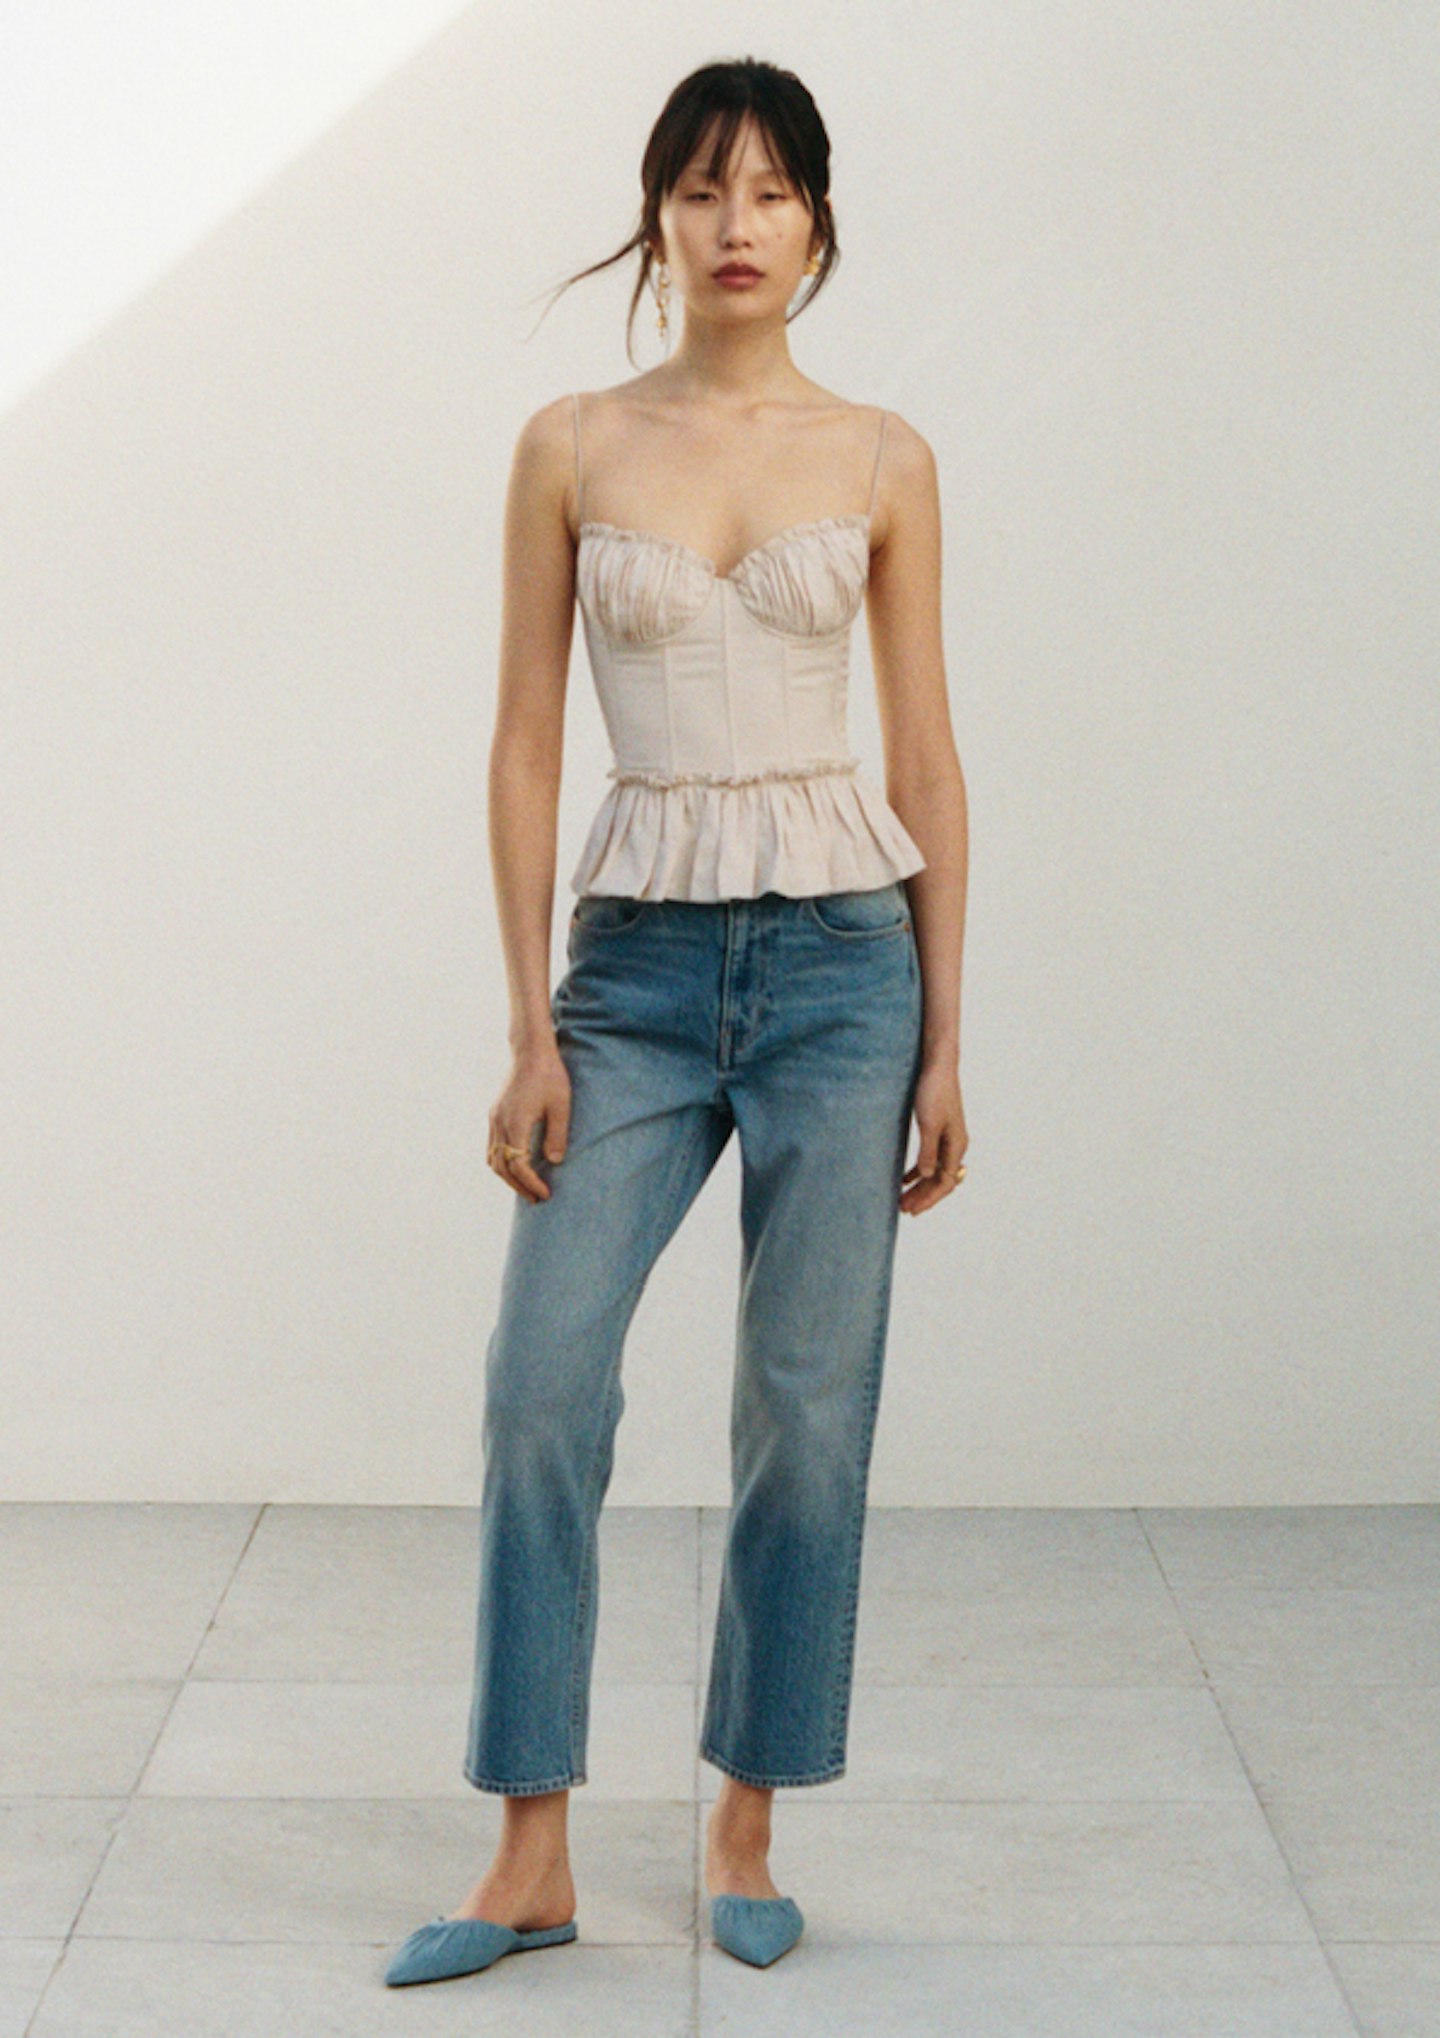 H&M x Brock Collection jeans and corset top